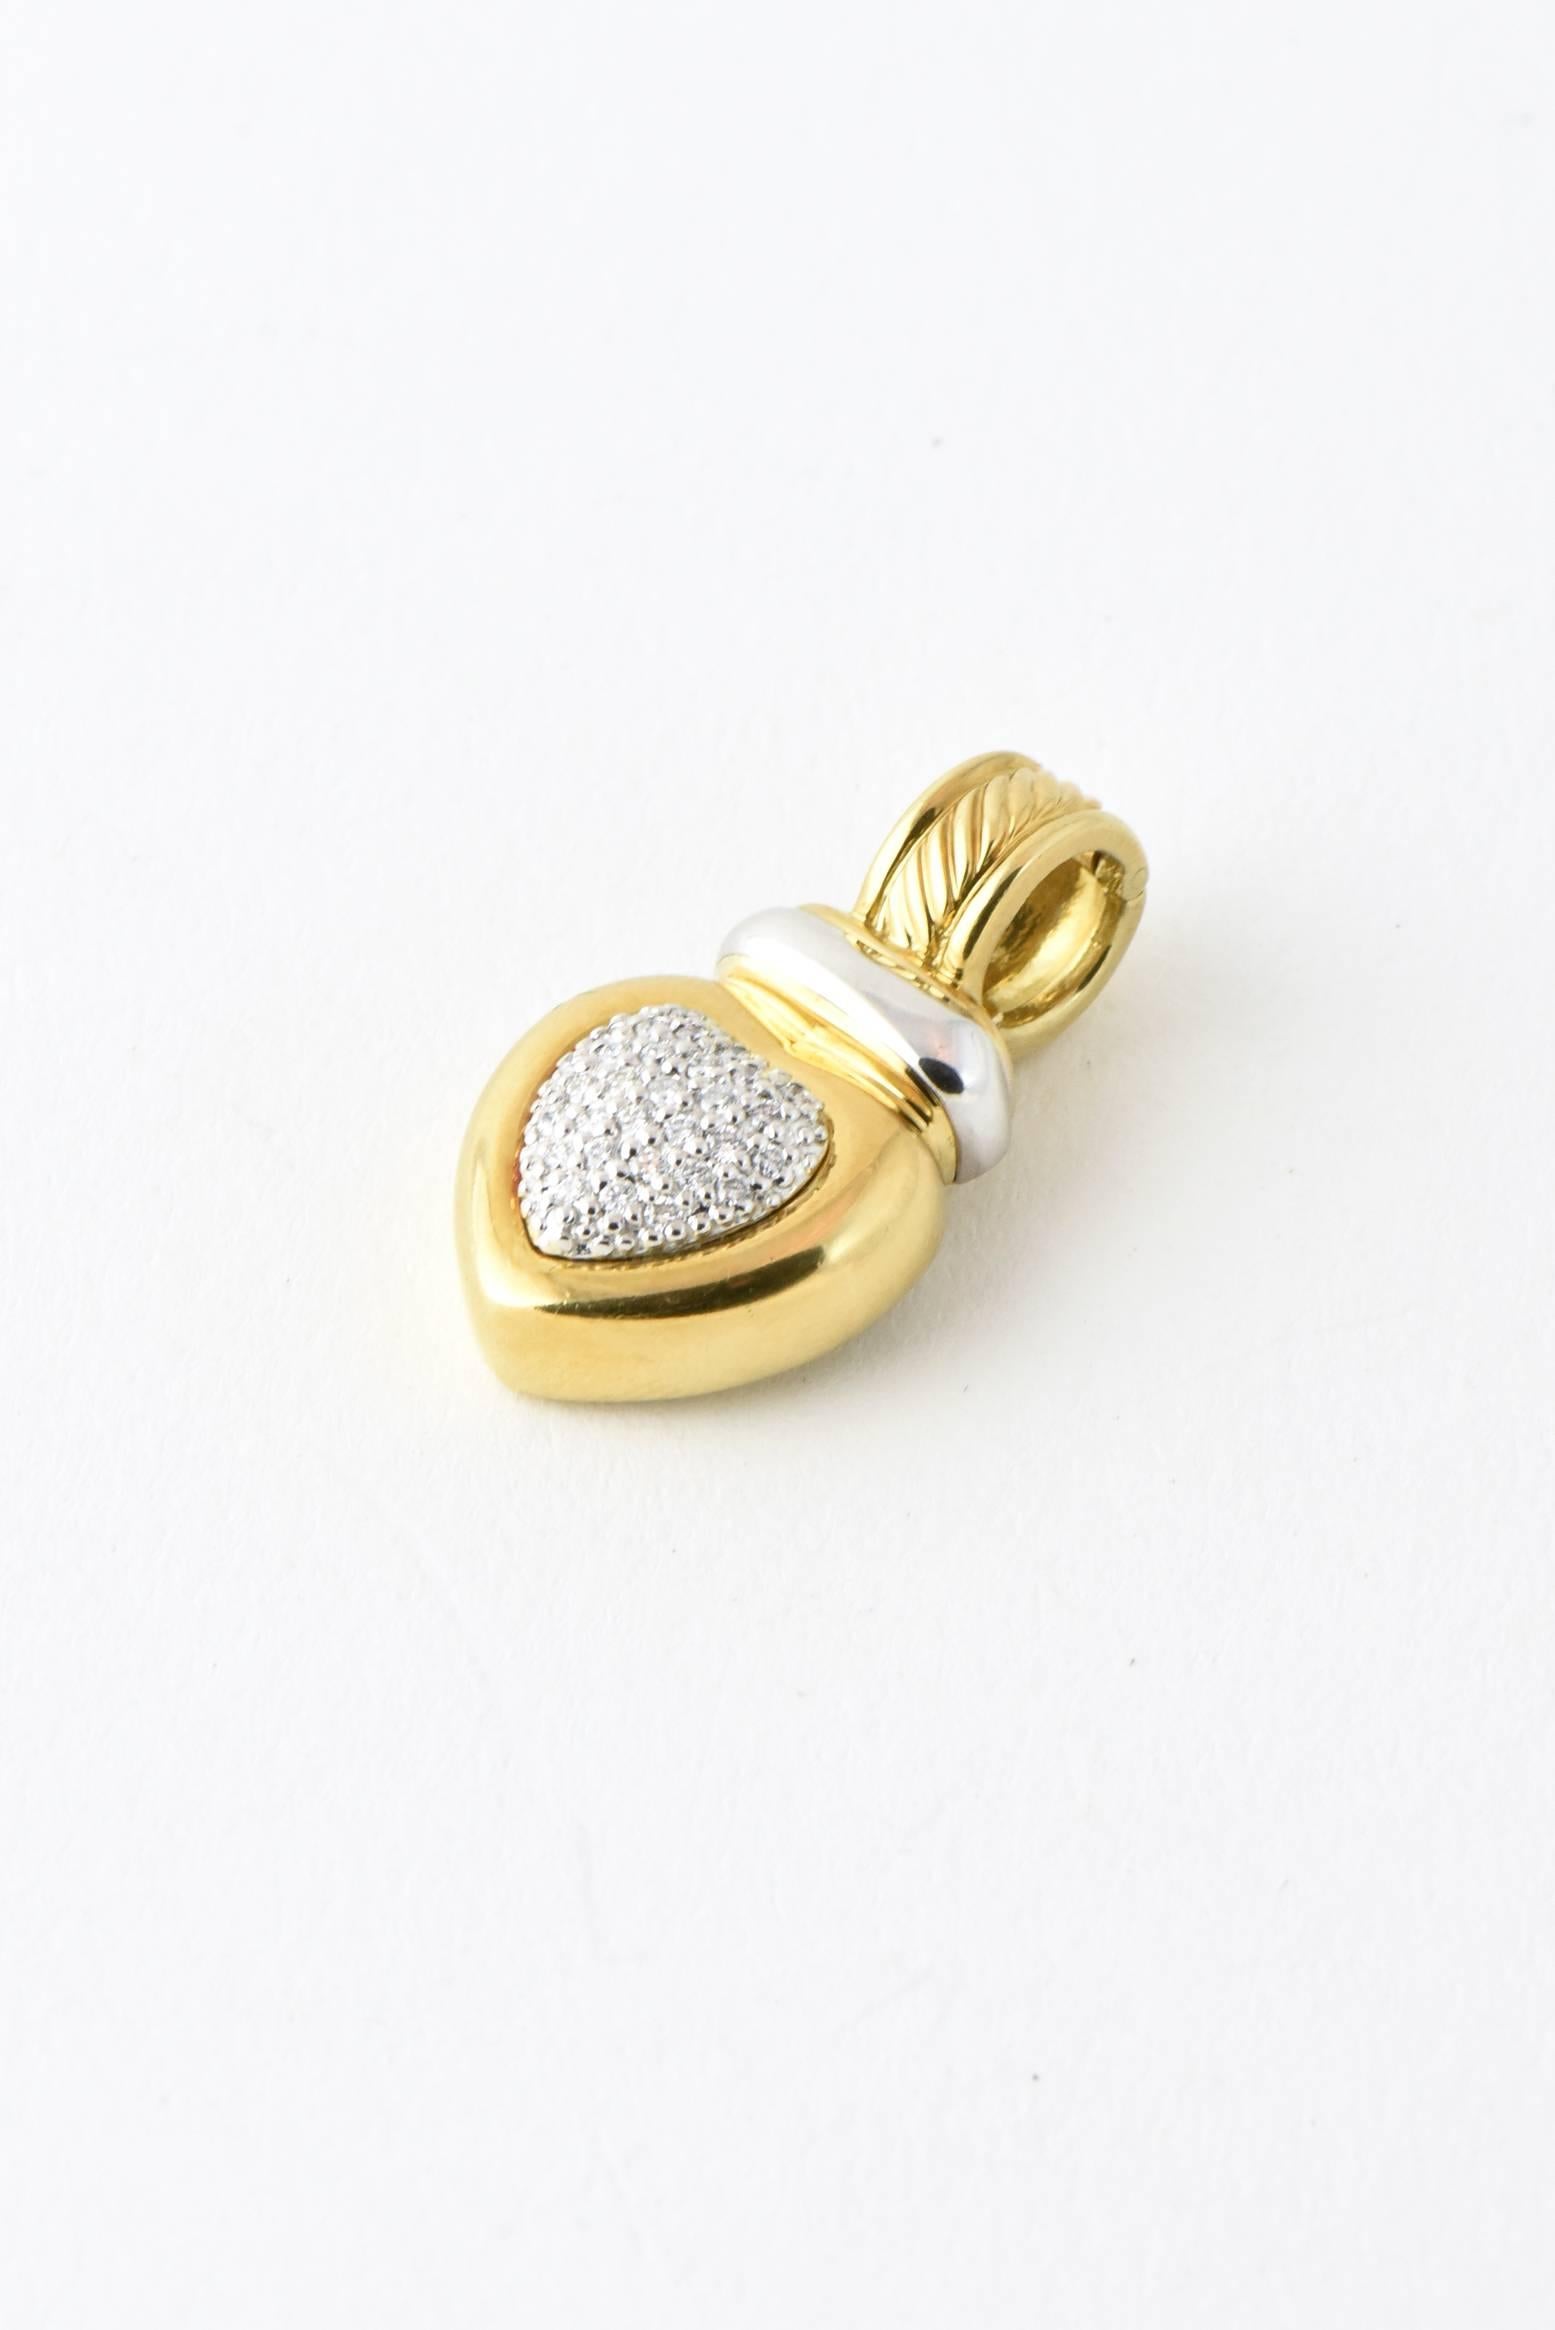 18K yellow & white gold David Yurman heart enhancer featuring 0.30 carats of round brilliant diamonds with hinged clip closures.